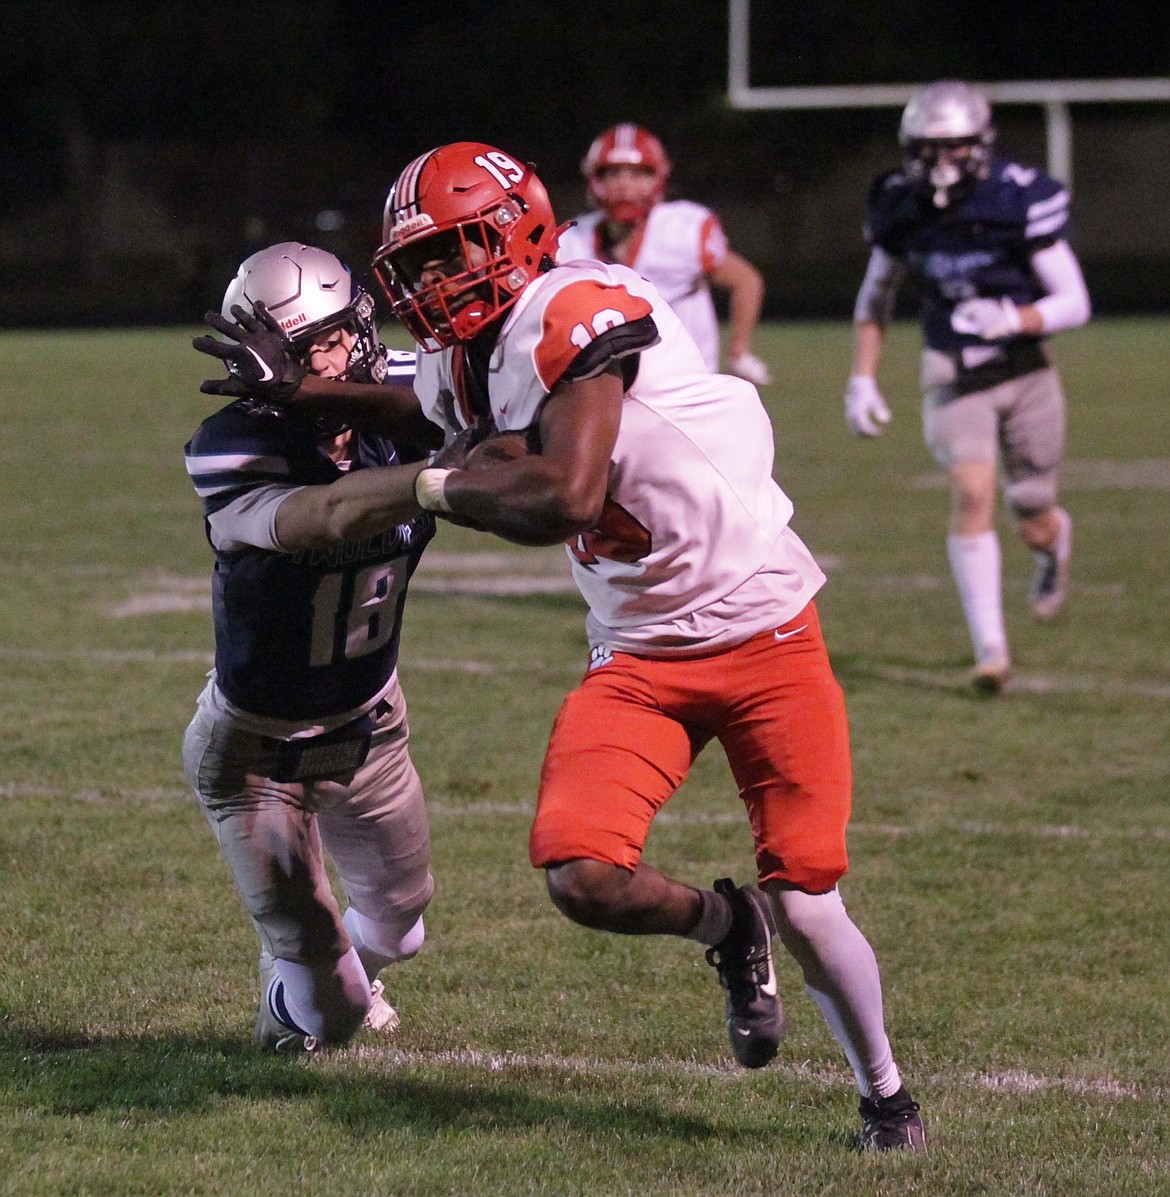 Eli Allshouse of Sandpoint races toward the end zone as Jacob Hill of Lake City tries to tackle him after Allshouse stripped the ball from the Lake City receiver, and ran it in for a touchdown in the third quarter Friday night at Lake City.